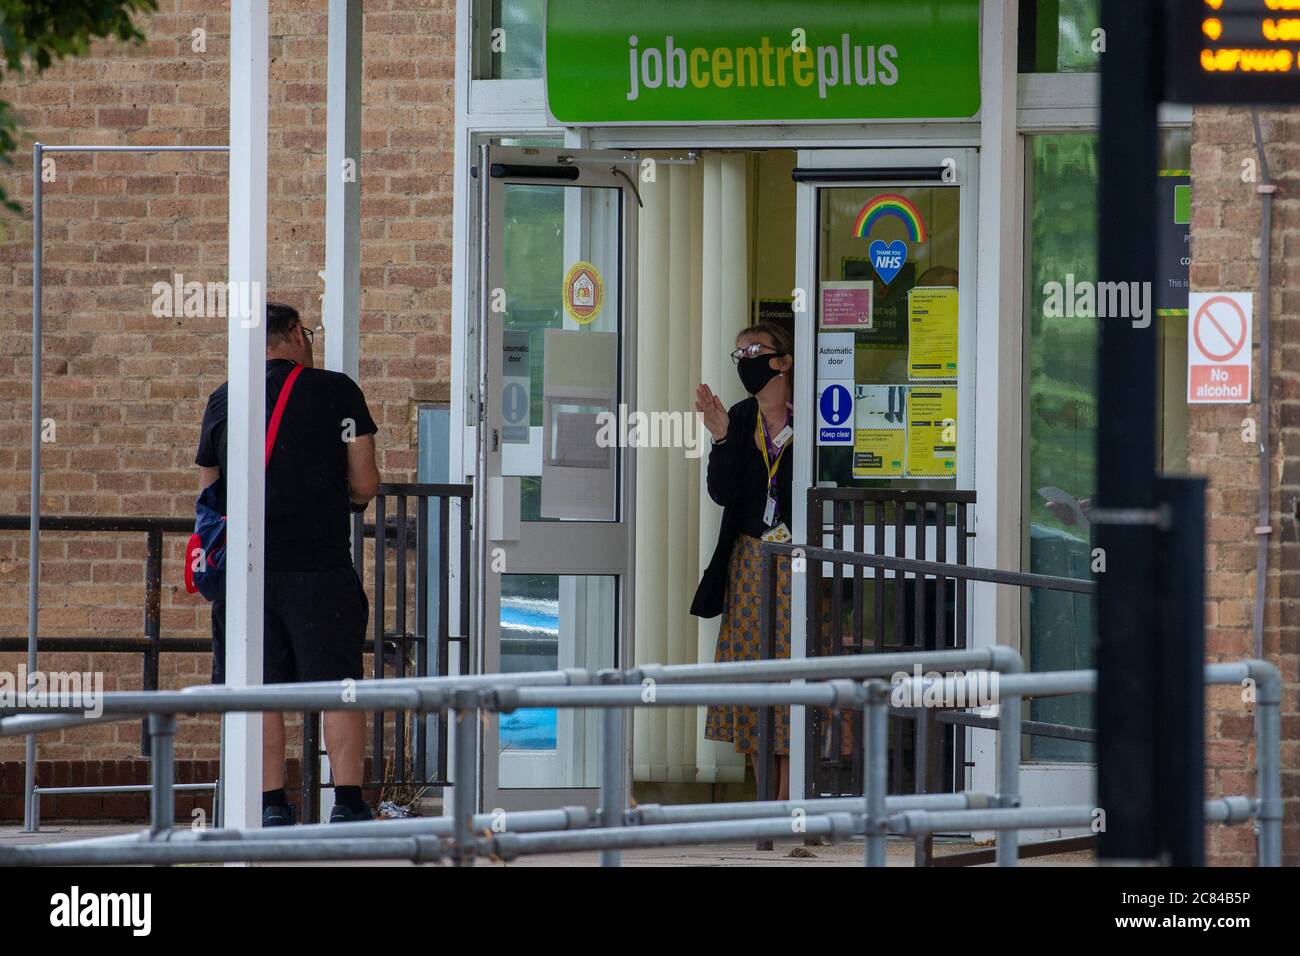 Picture dated July 15th 2020 shows people  outside the job centre in Cambridge.It was announced today the unemployment rate is  2.6 million people.   The number of workers on UK payrolls has fallen by 649,000 between March and June, official figures indicate.  The number of people claiming work-related benefits - including the unemployed - was 2.6 million.  However, the total was not as big as many feared, because large numbers of firms have put employees on the government-backed furlough scheme.  Economists say the full effect on employment will Stock Photo